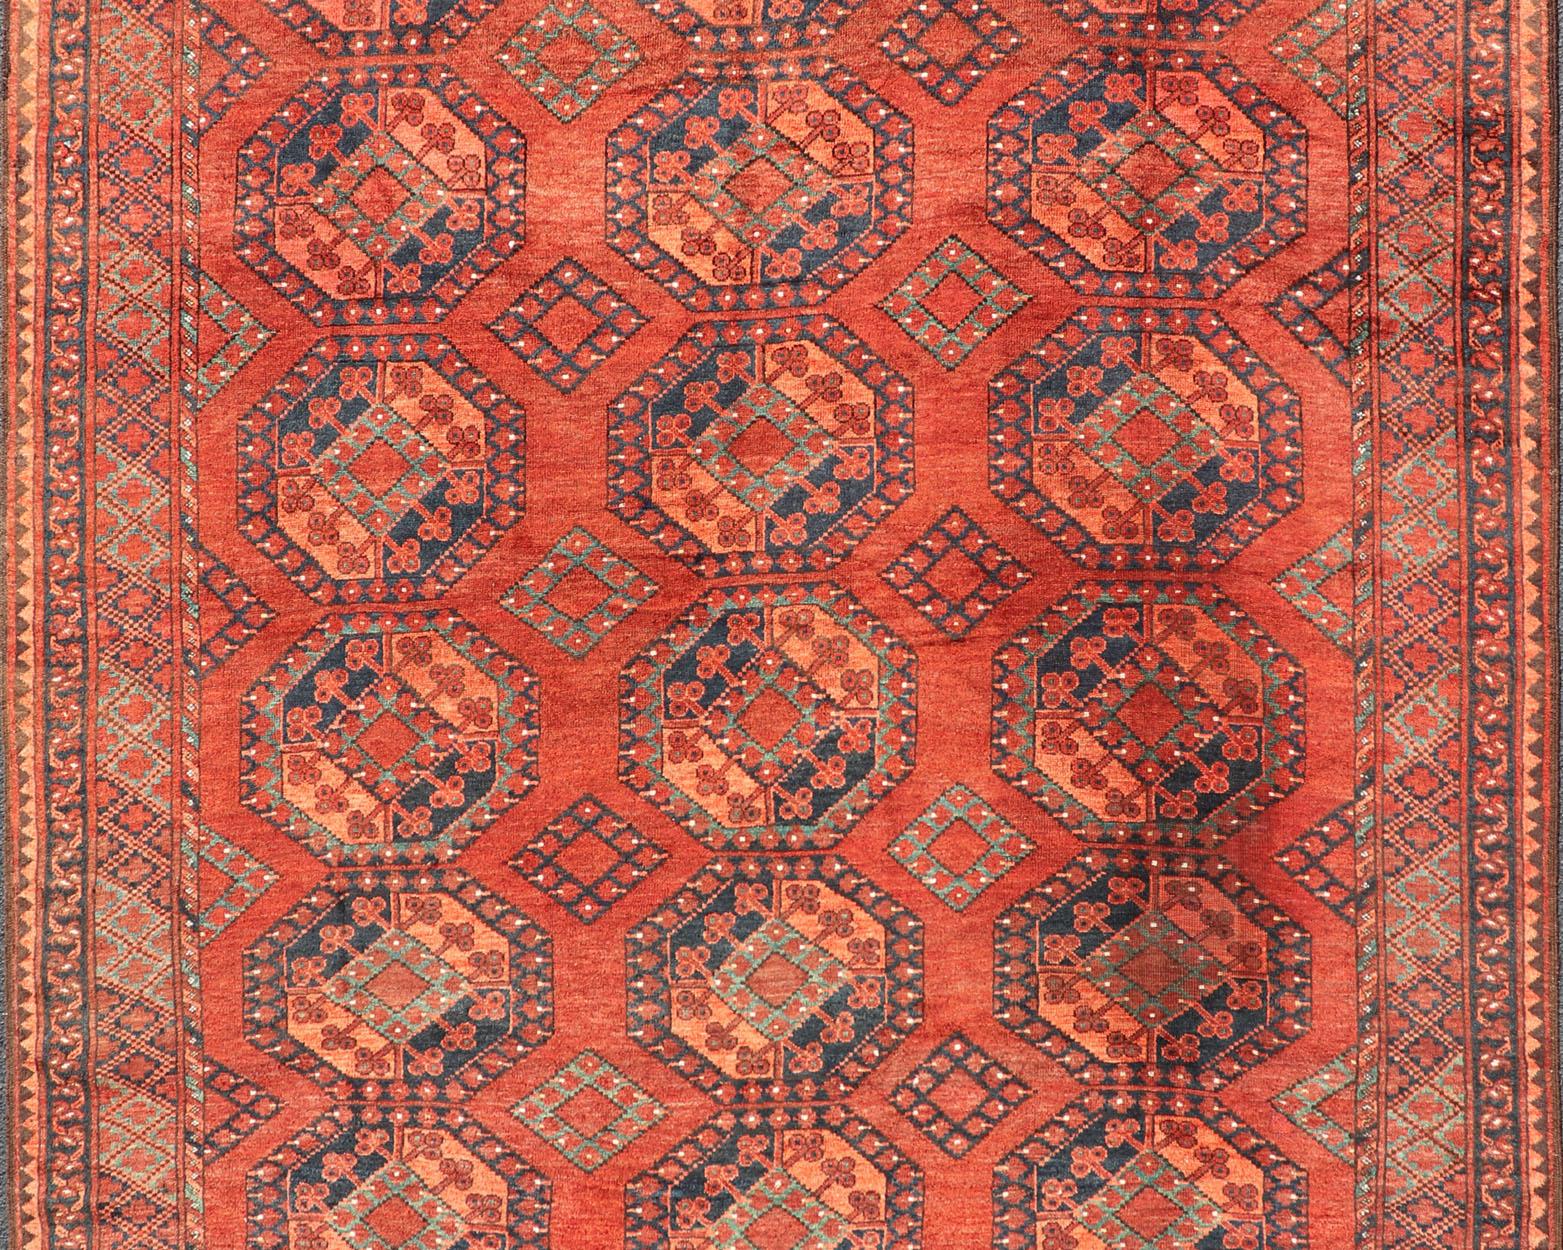 This Ersari rug has been hand-knotted in the finest wool. The rug features a repeating Gul design throughout the entirety of the piece, enclosed within a complementary, multi-tiered border, depicting small repeating motifs. The rug is rendered in